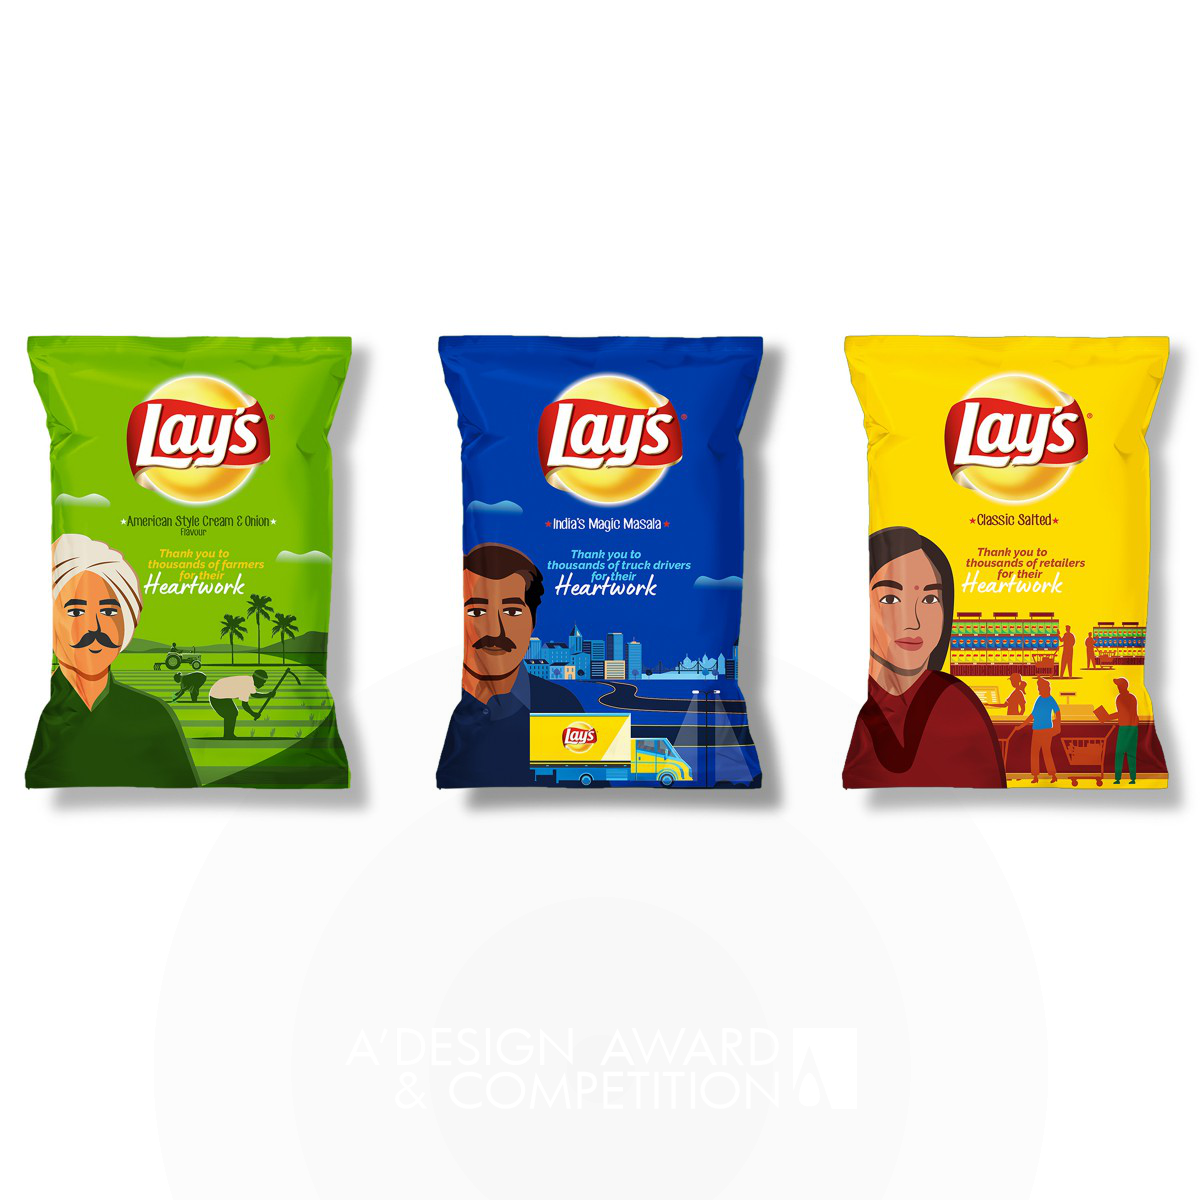 Lays Heartwork <b>Campaign 